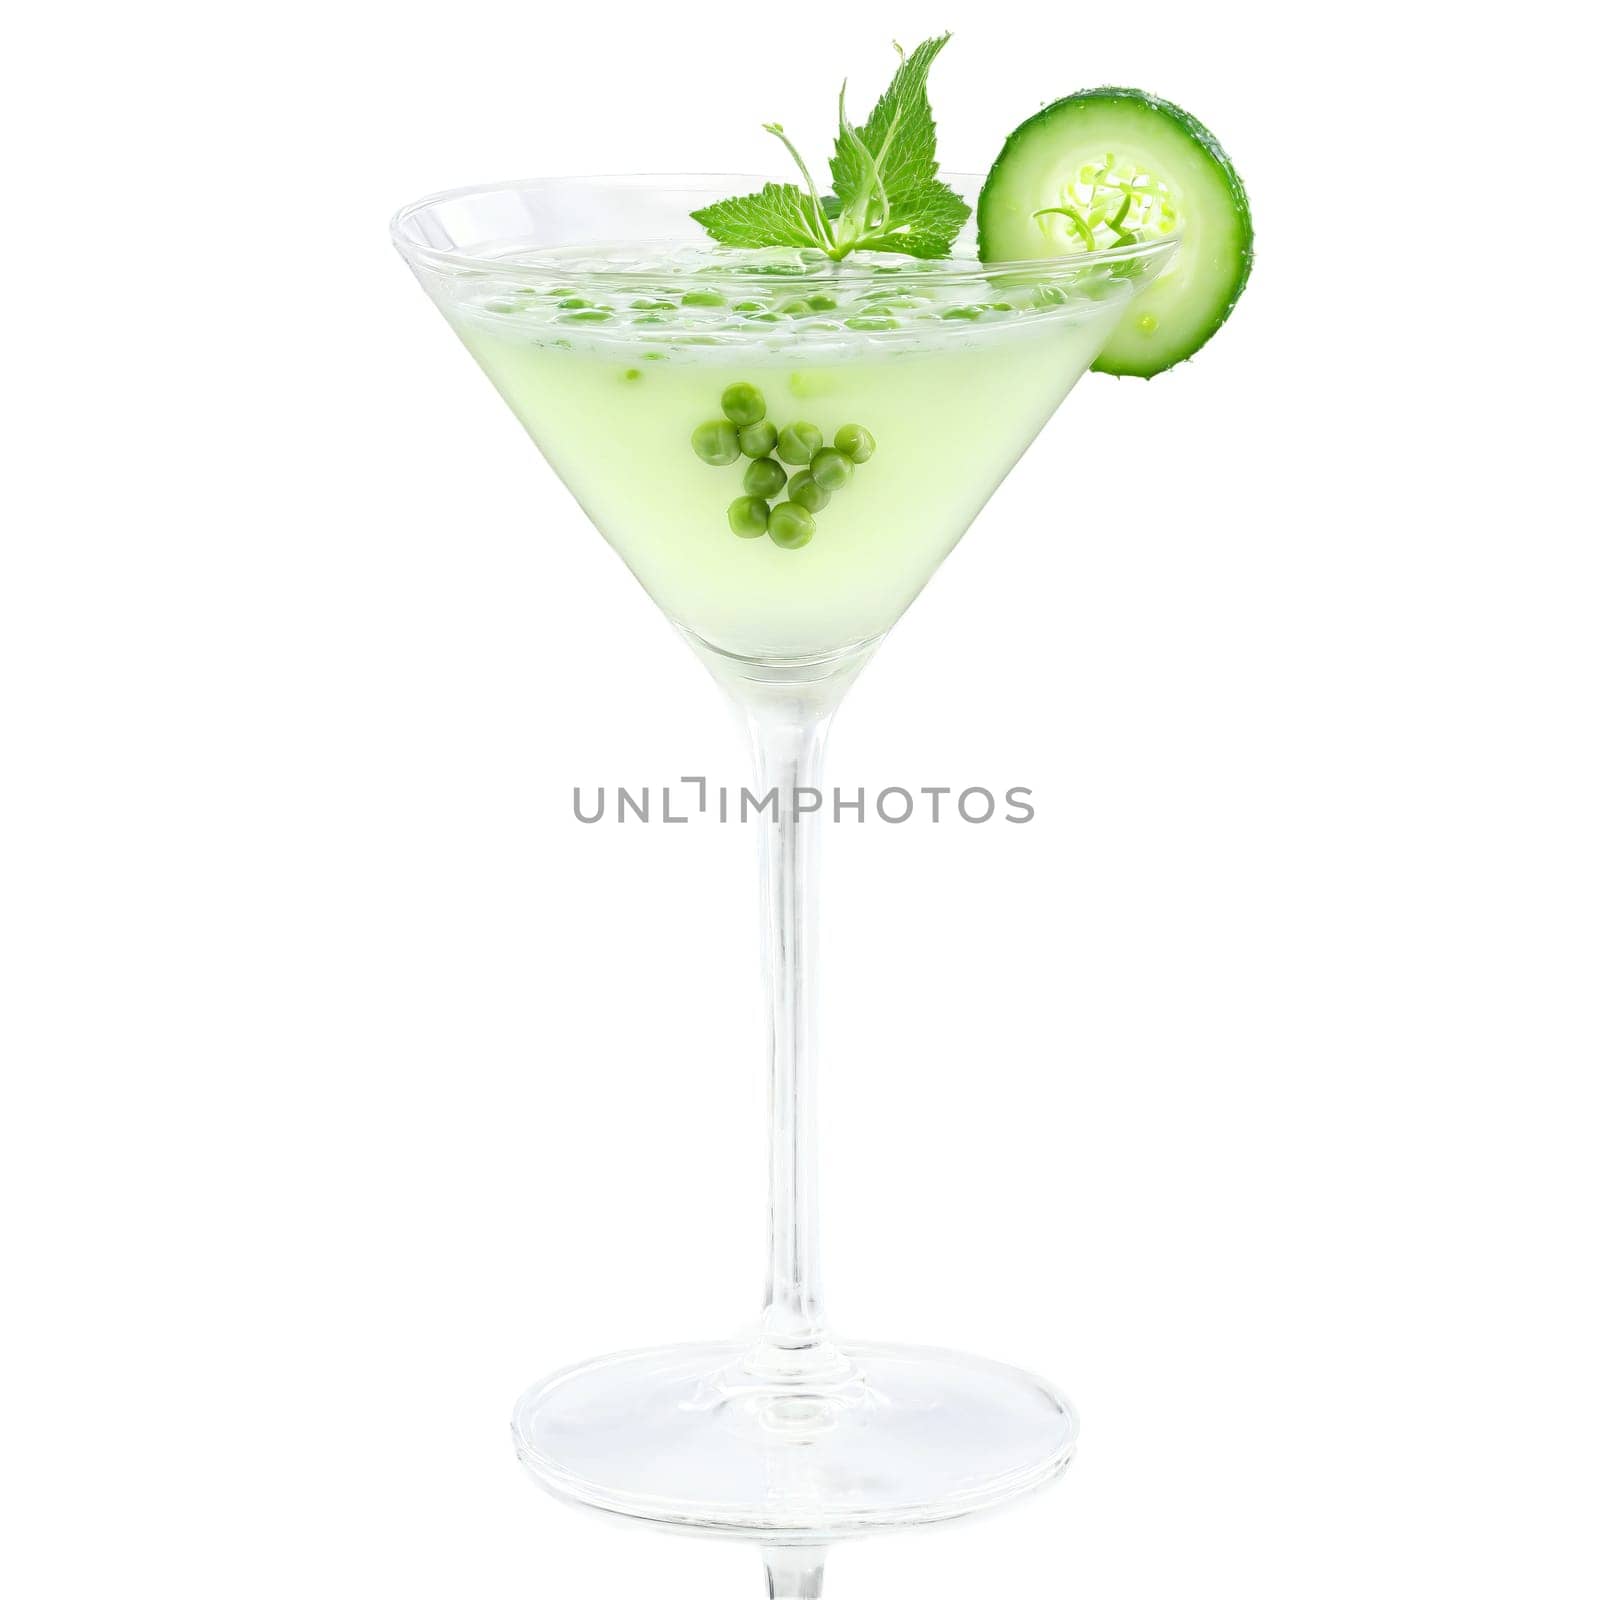 Cucumber wasabi martini with wasabi peas and cucumber ribbon garnish floating Food and culinary concept by panophotograph